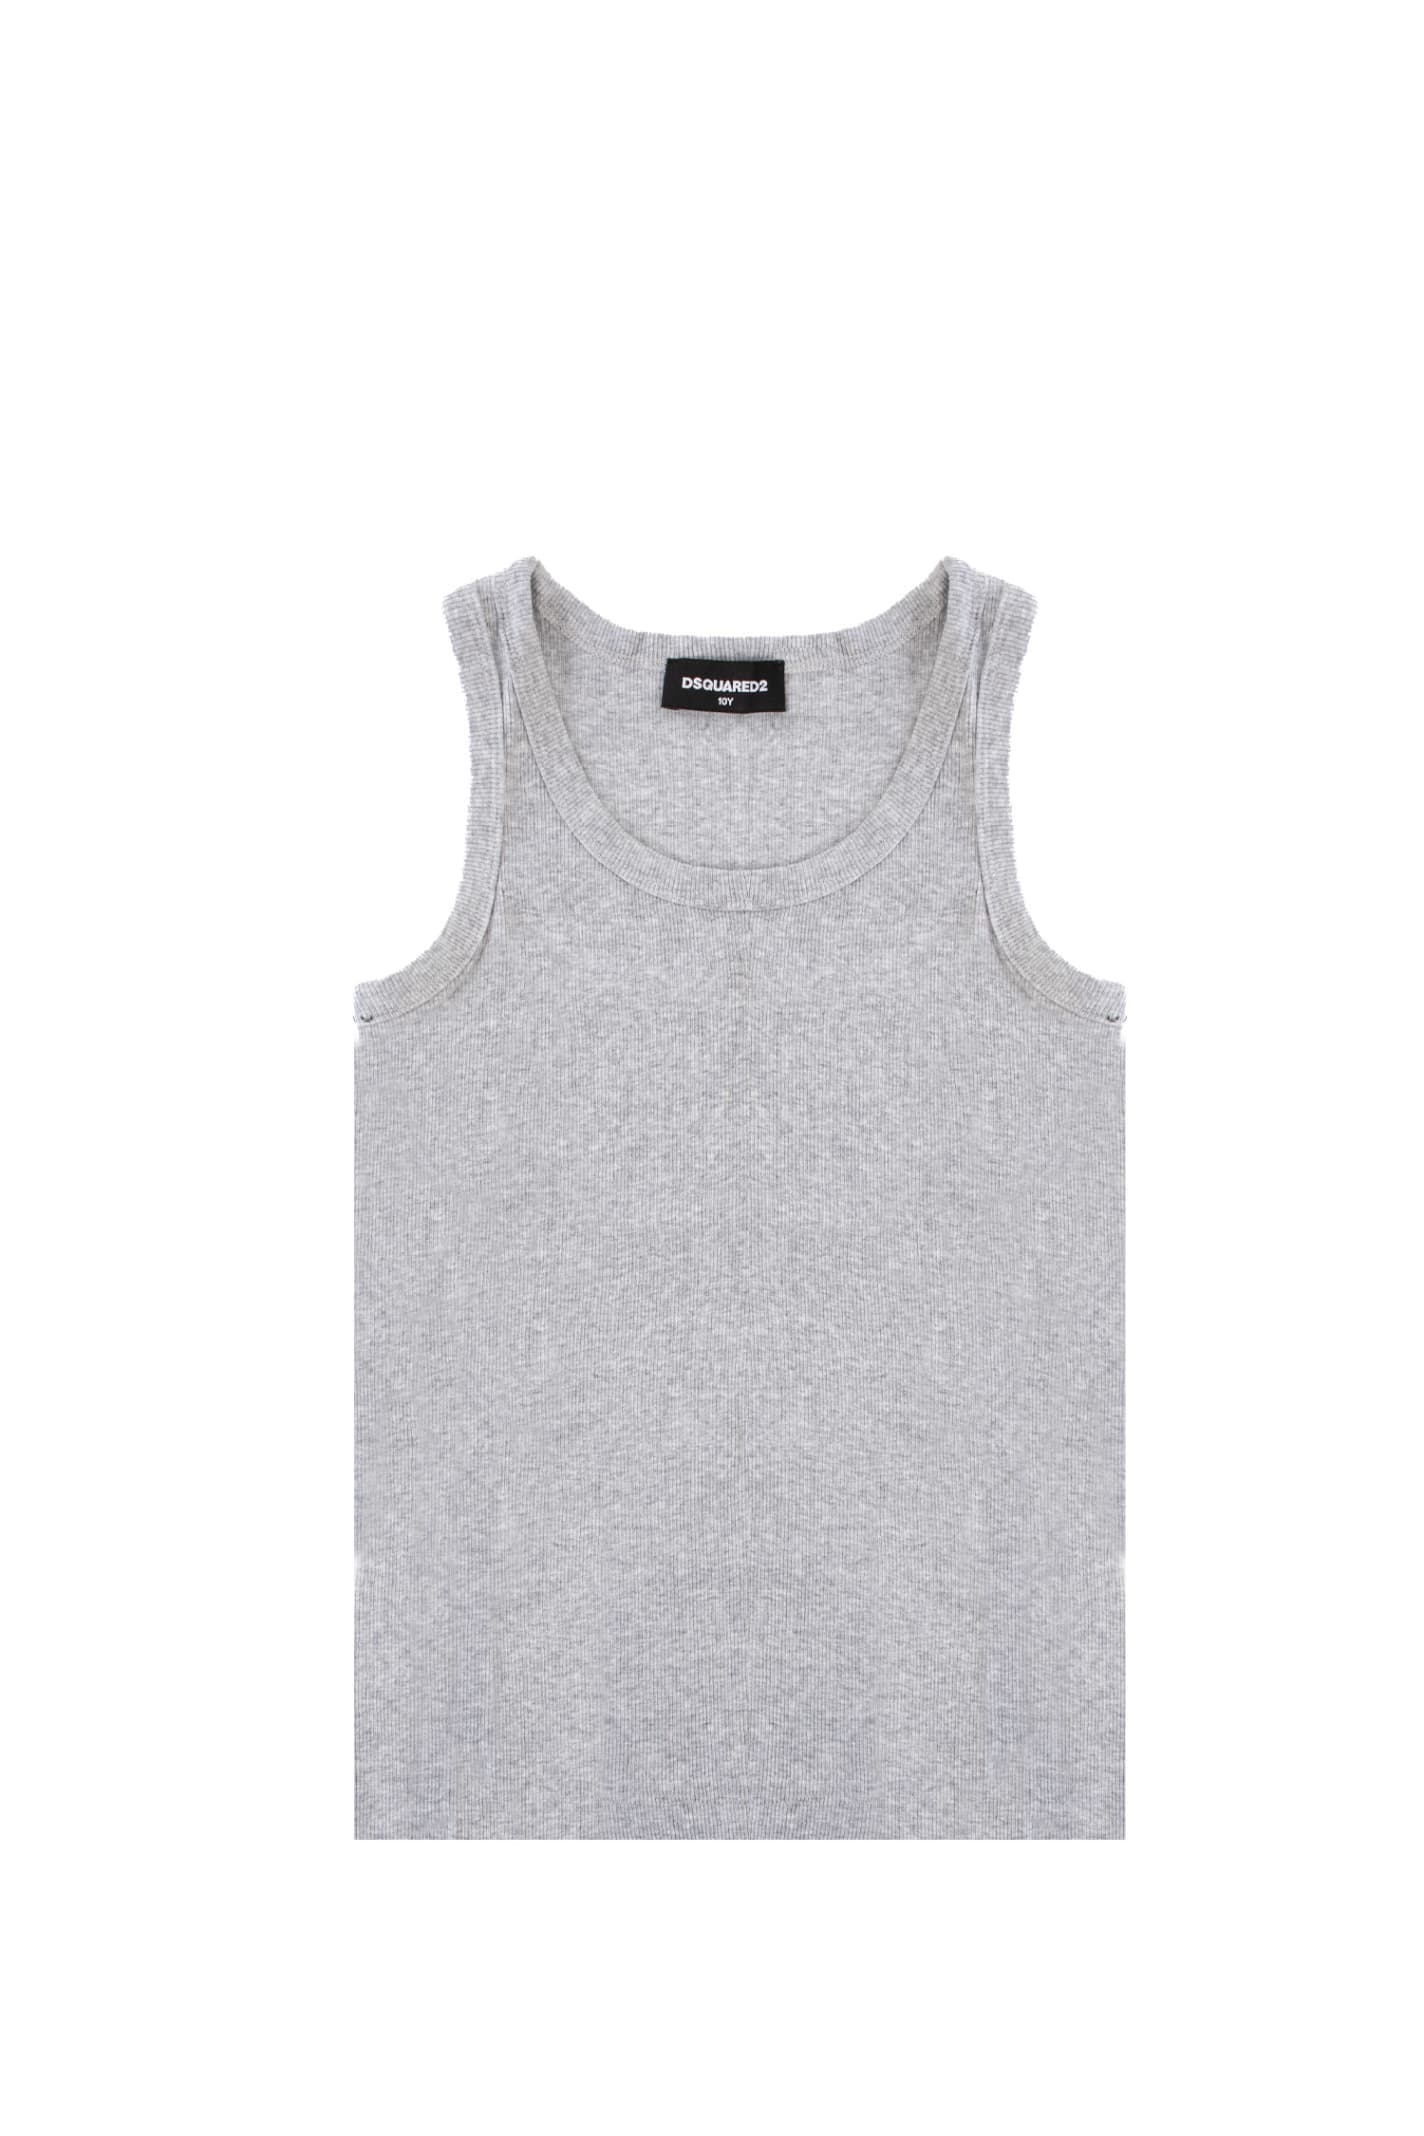 Dsquared2 Kids' Cotton Tank Top In Grey